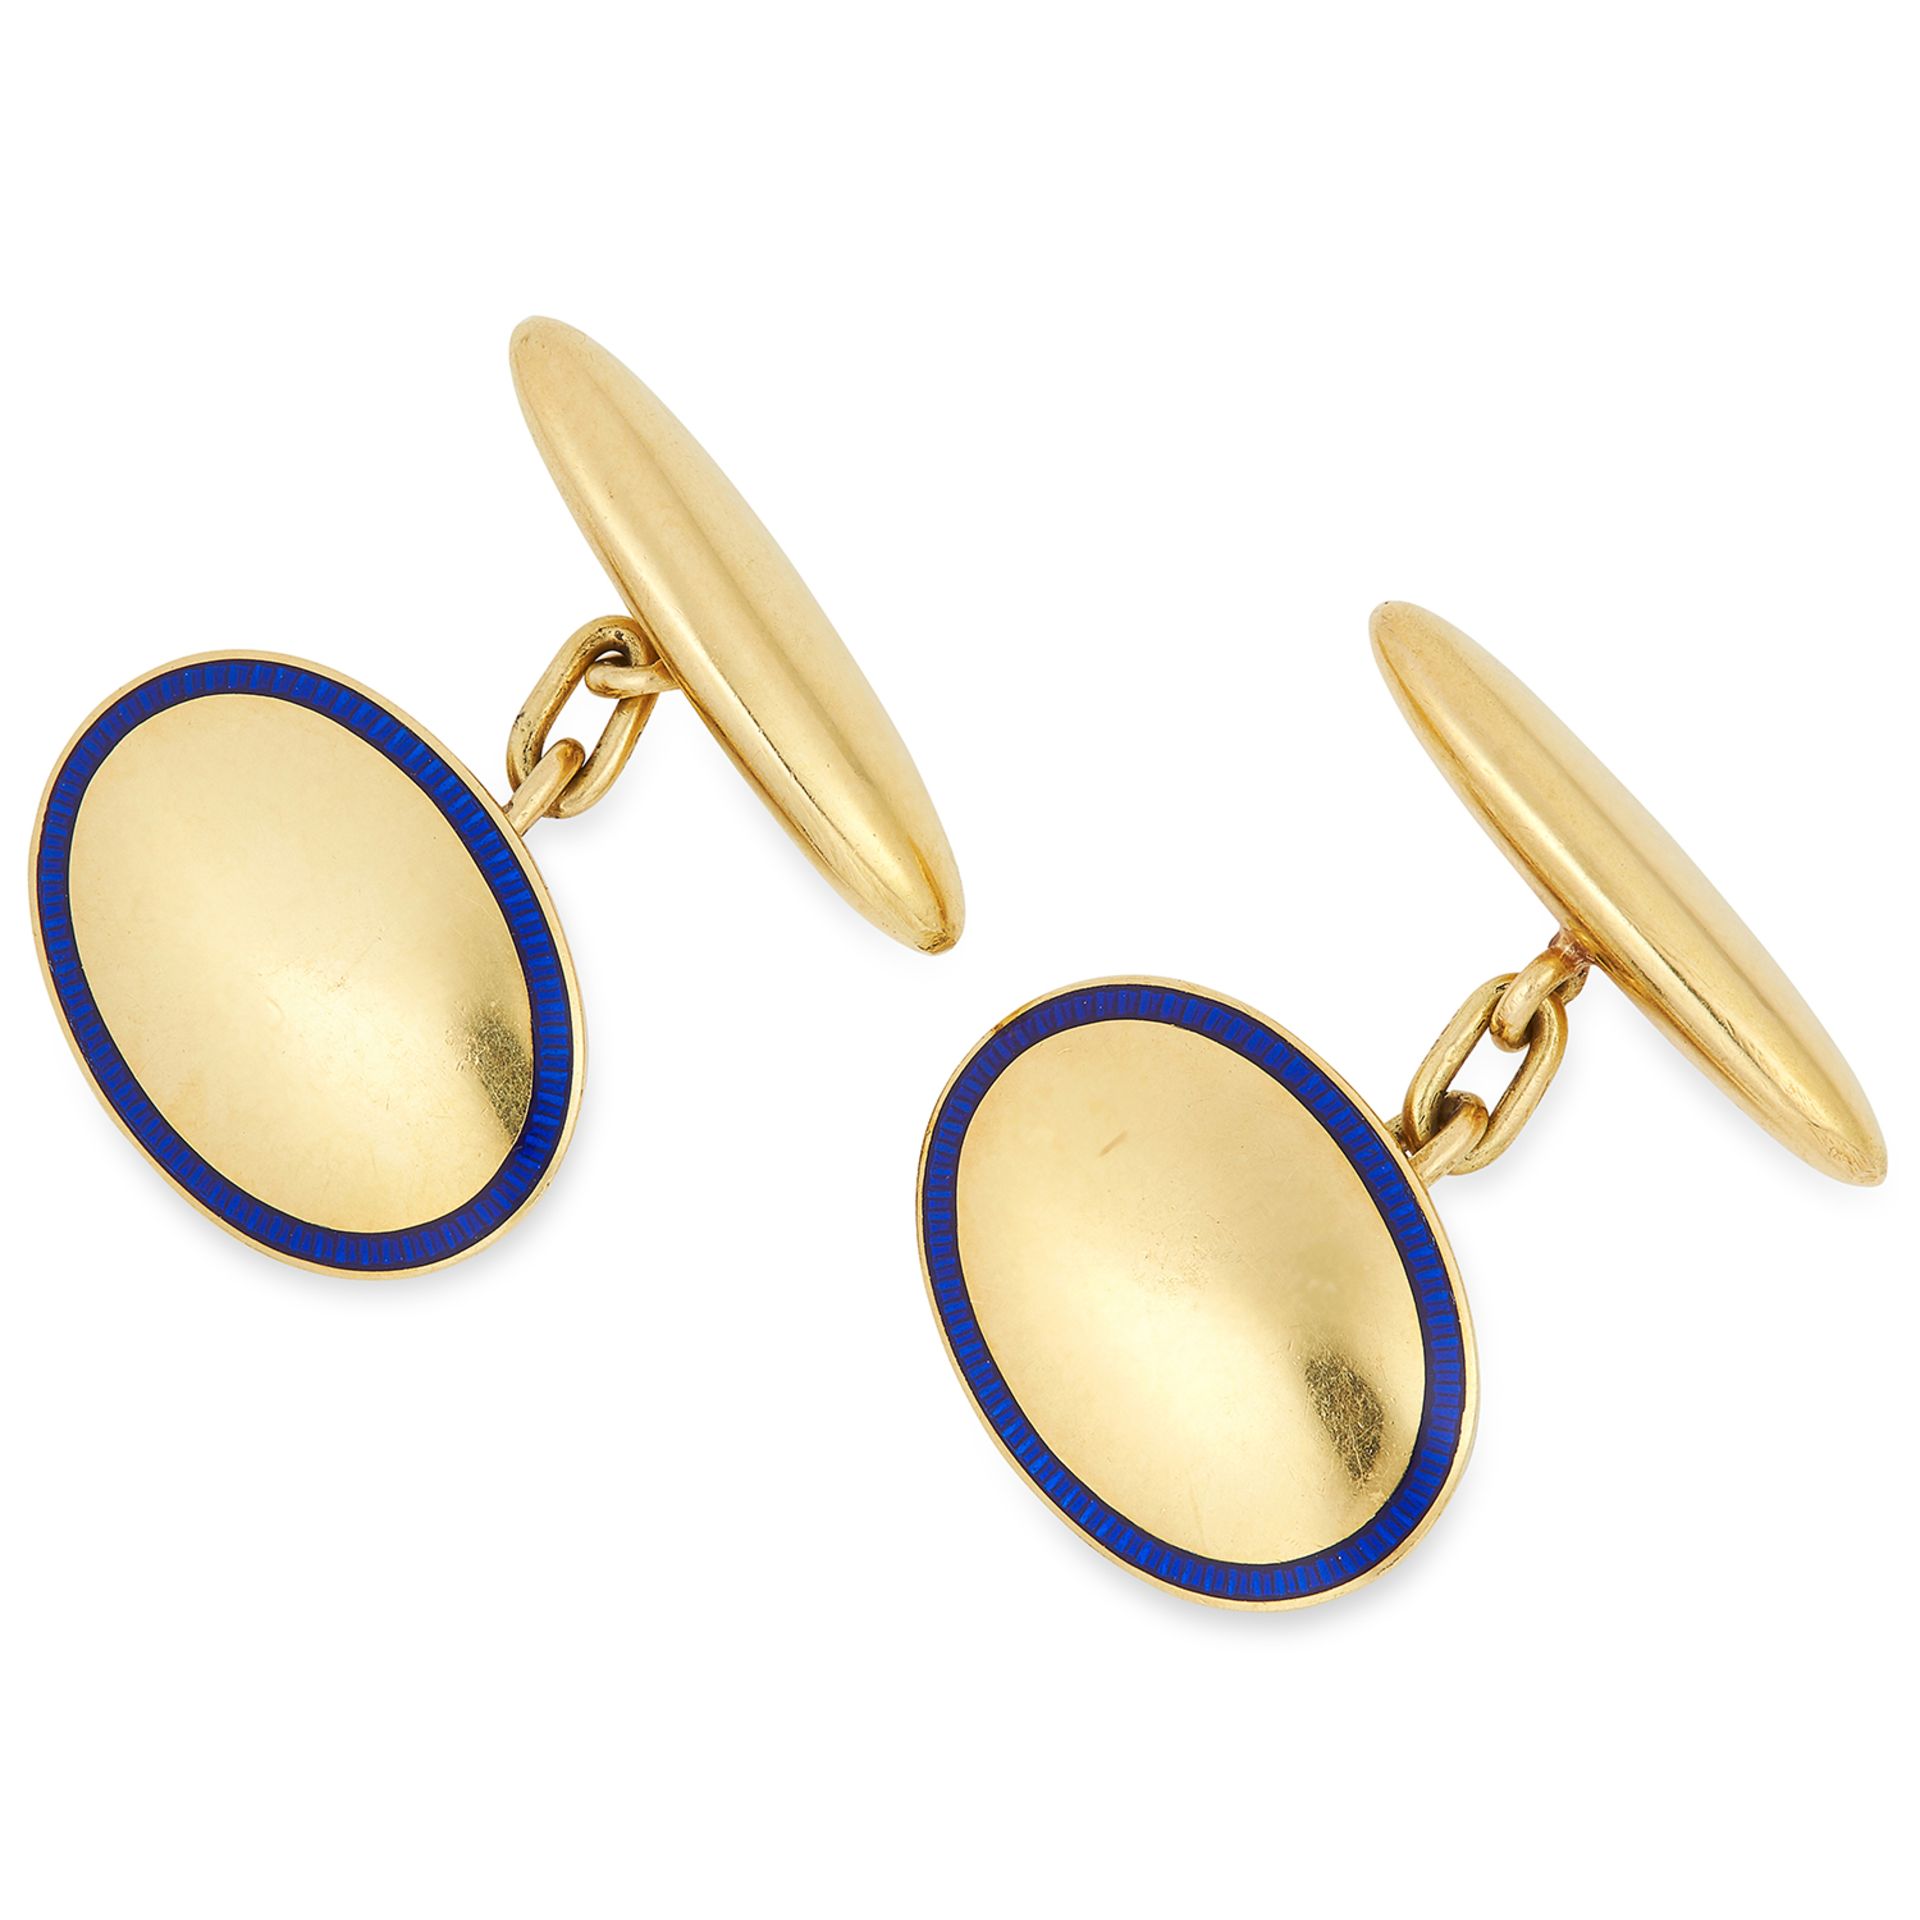 ANTIQUE ENAMEL CUFFLINKS each comprising of two links set with blue enamel, 7g.